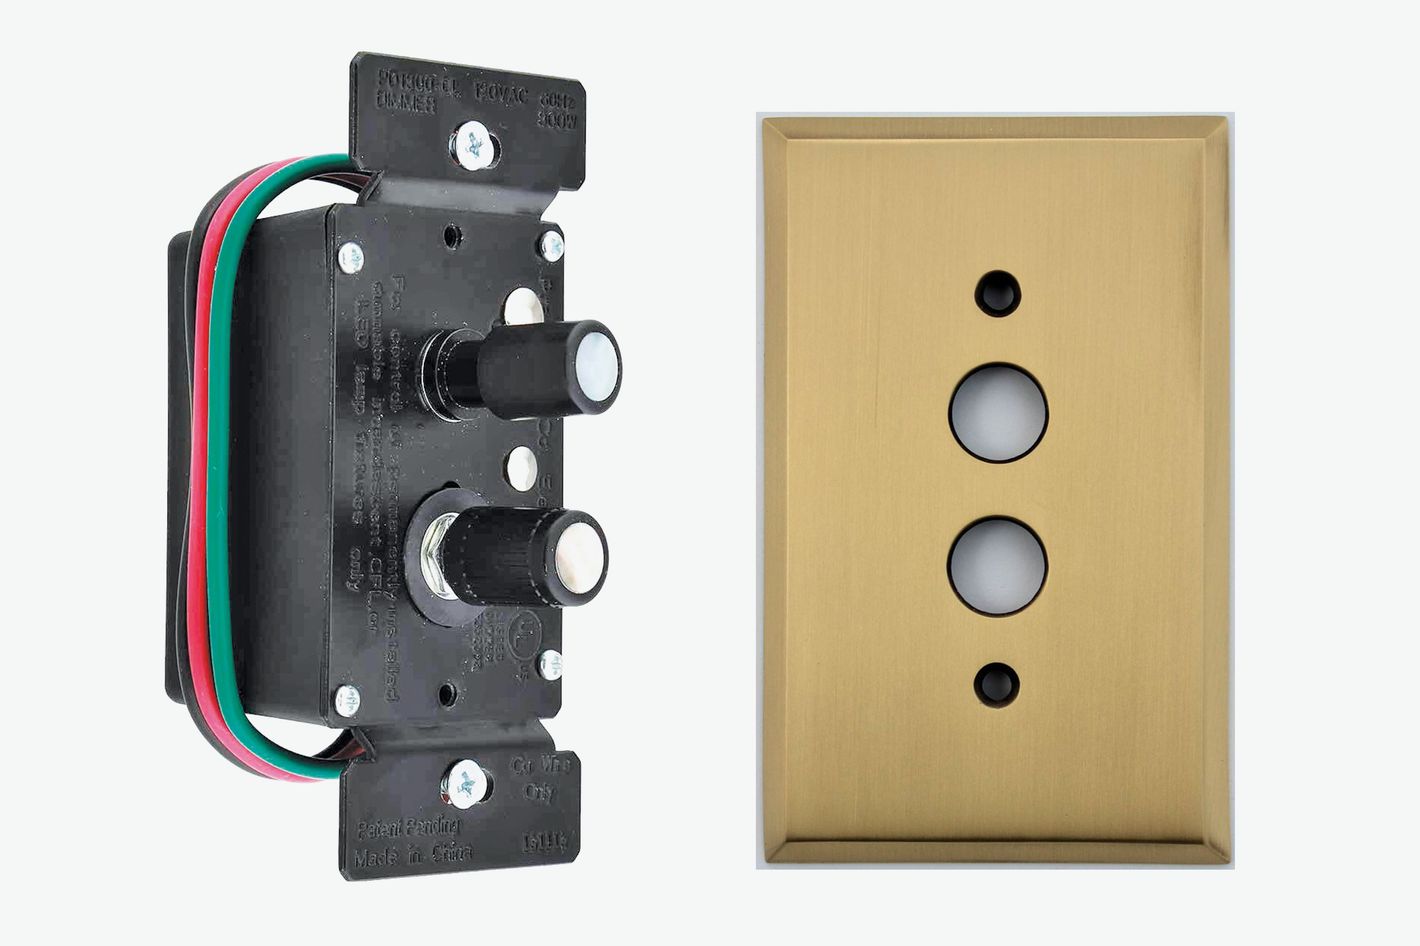 Push-button dimmer switch and brass wall plate